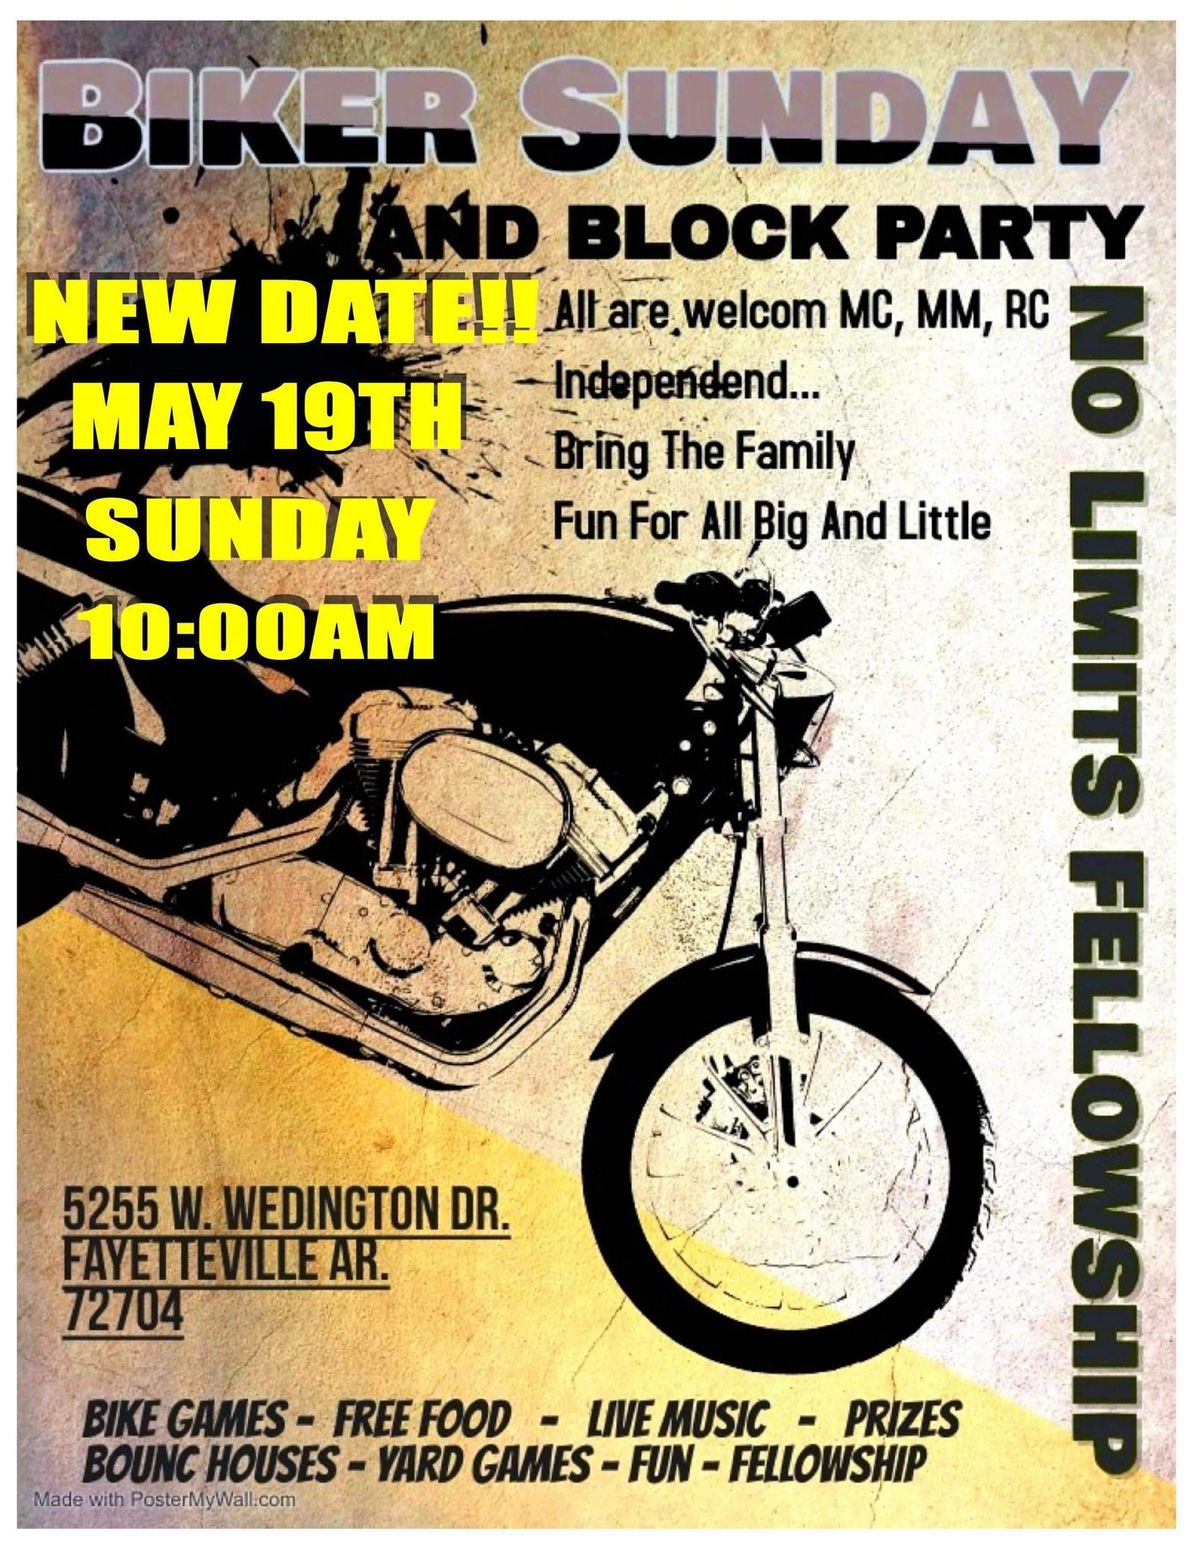 Biker Sunday And Block Party